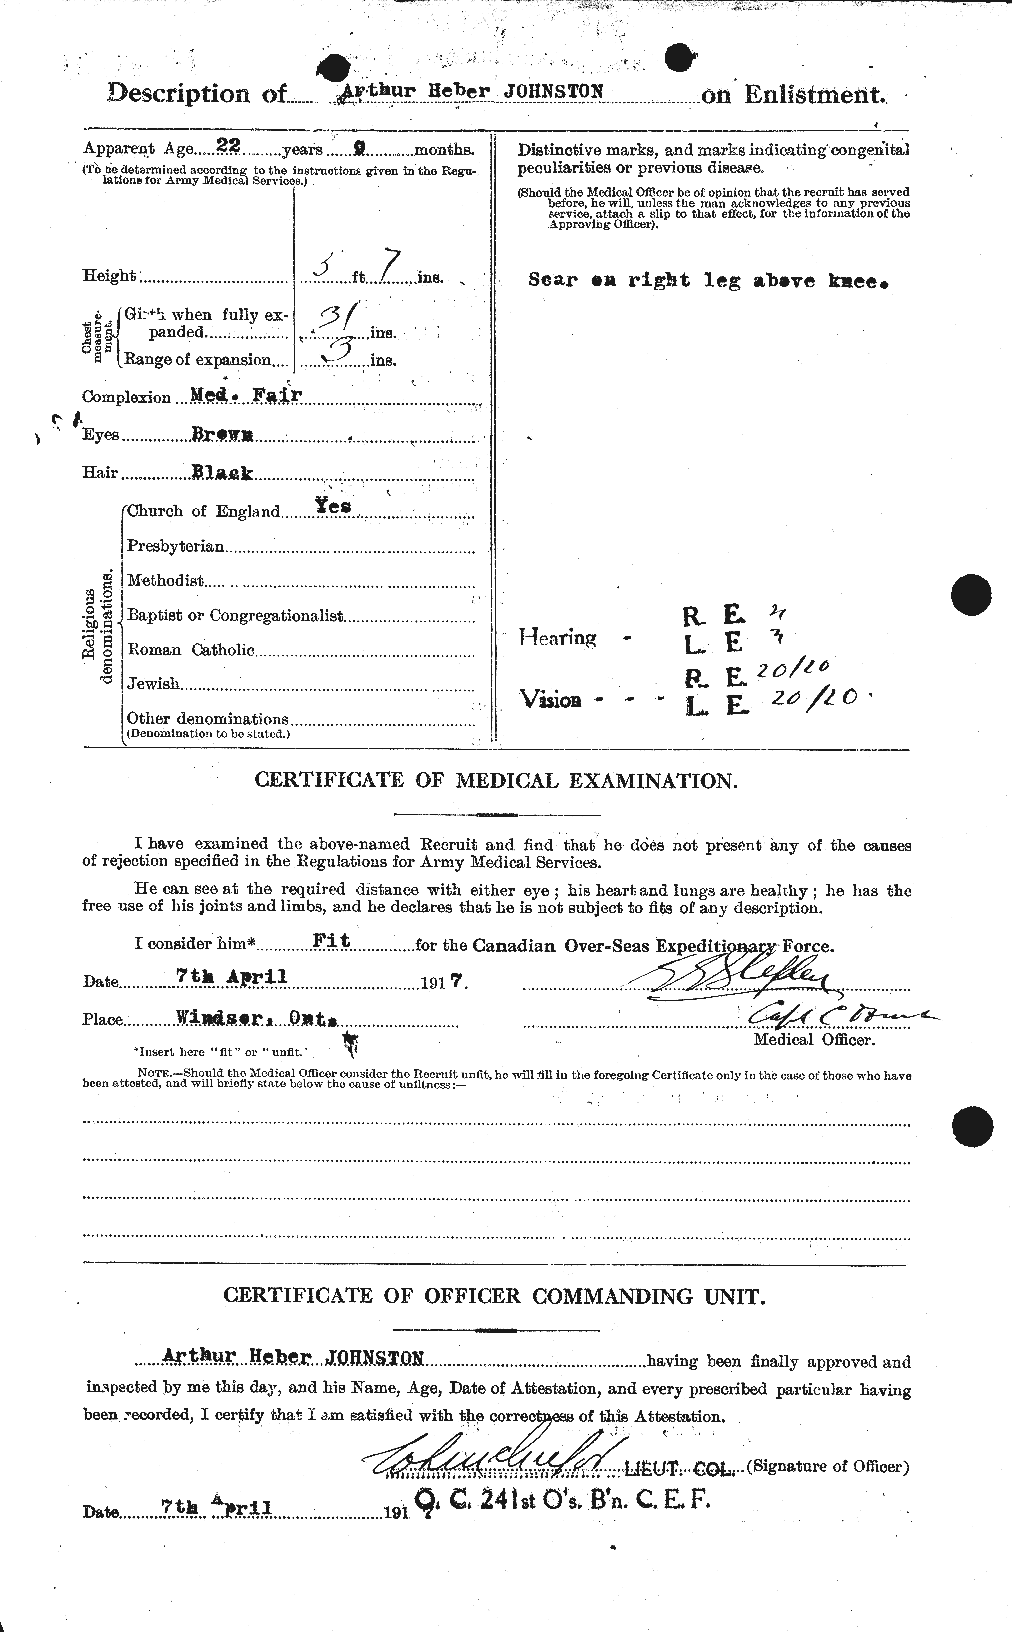 Personnel Records of the First World War - CEF 421045b